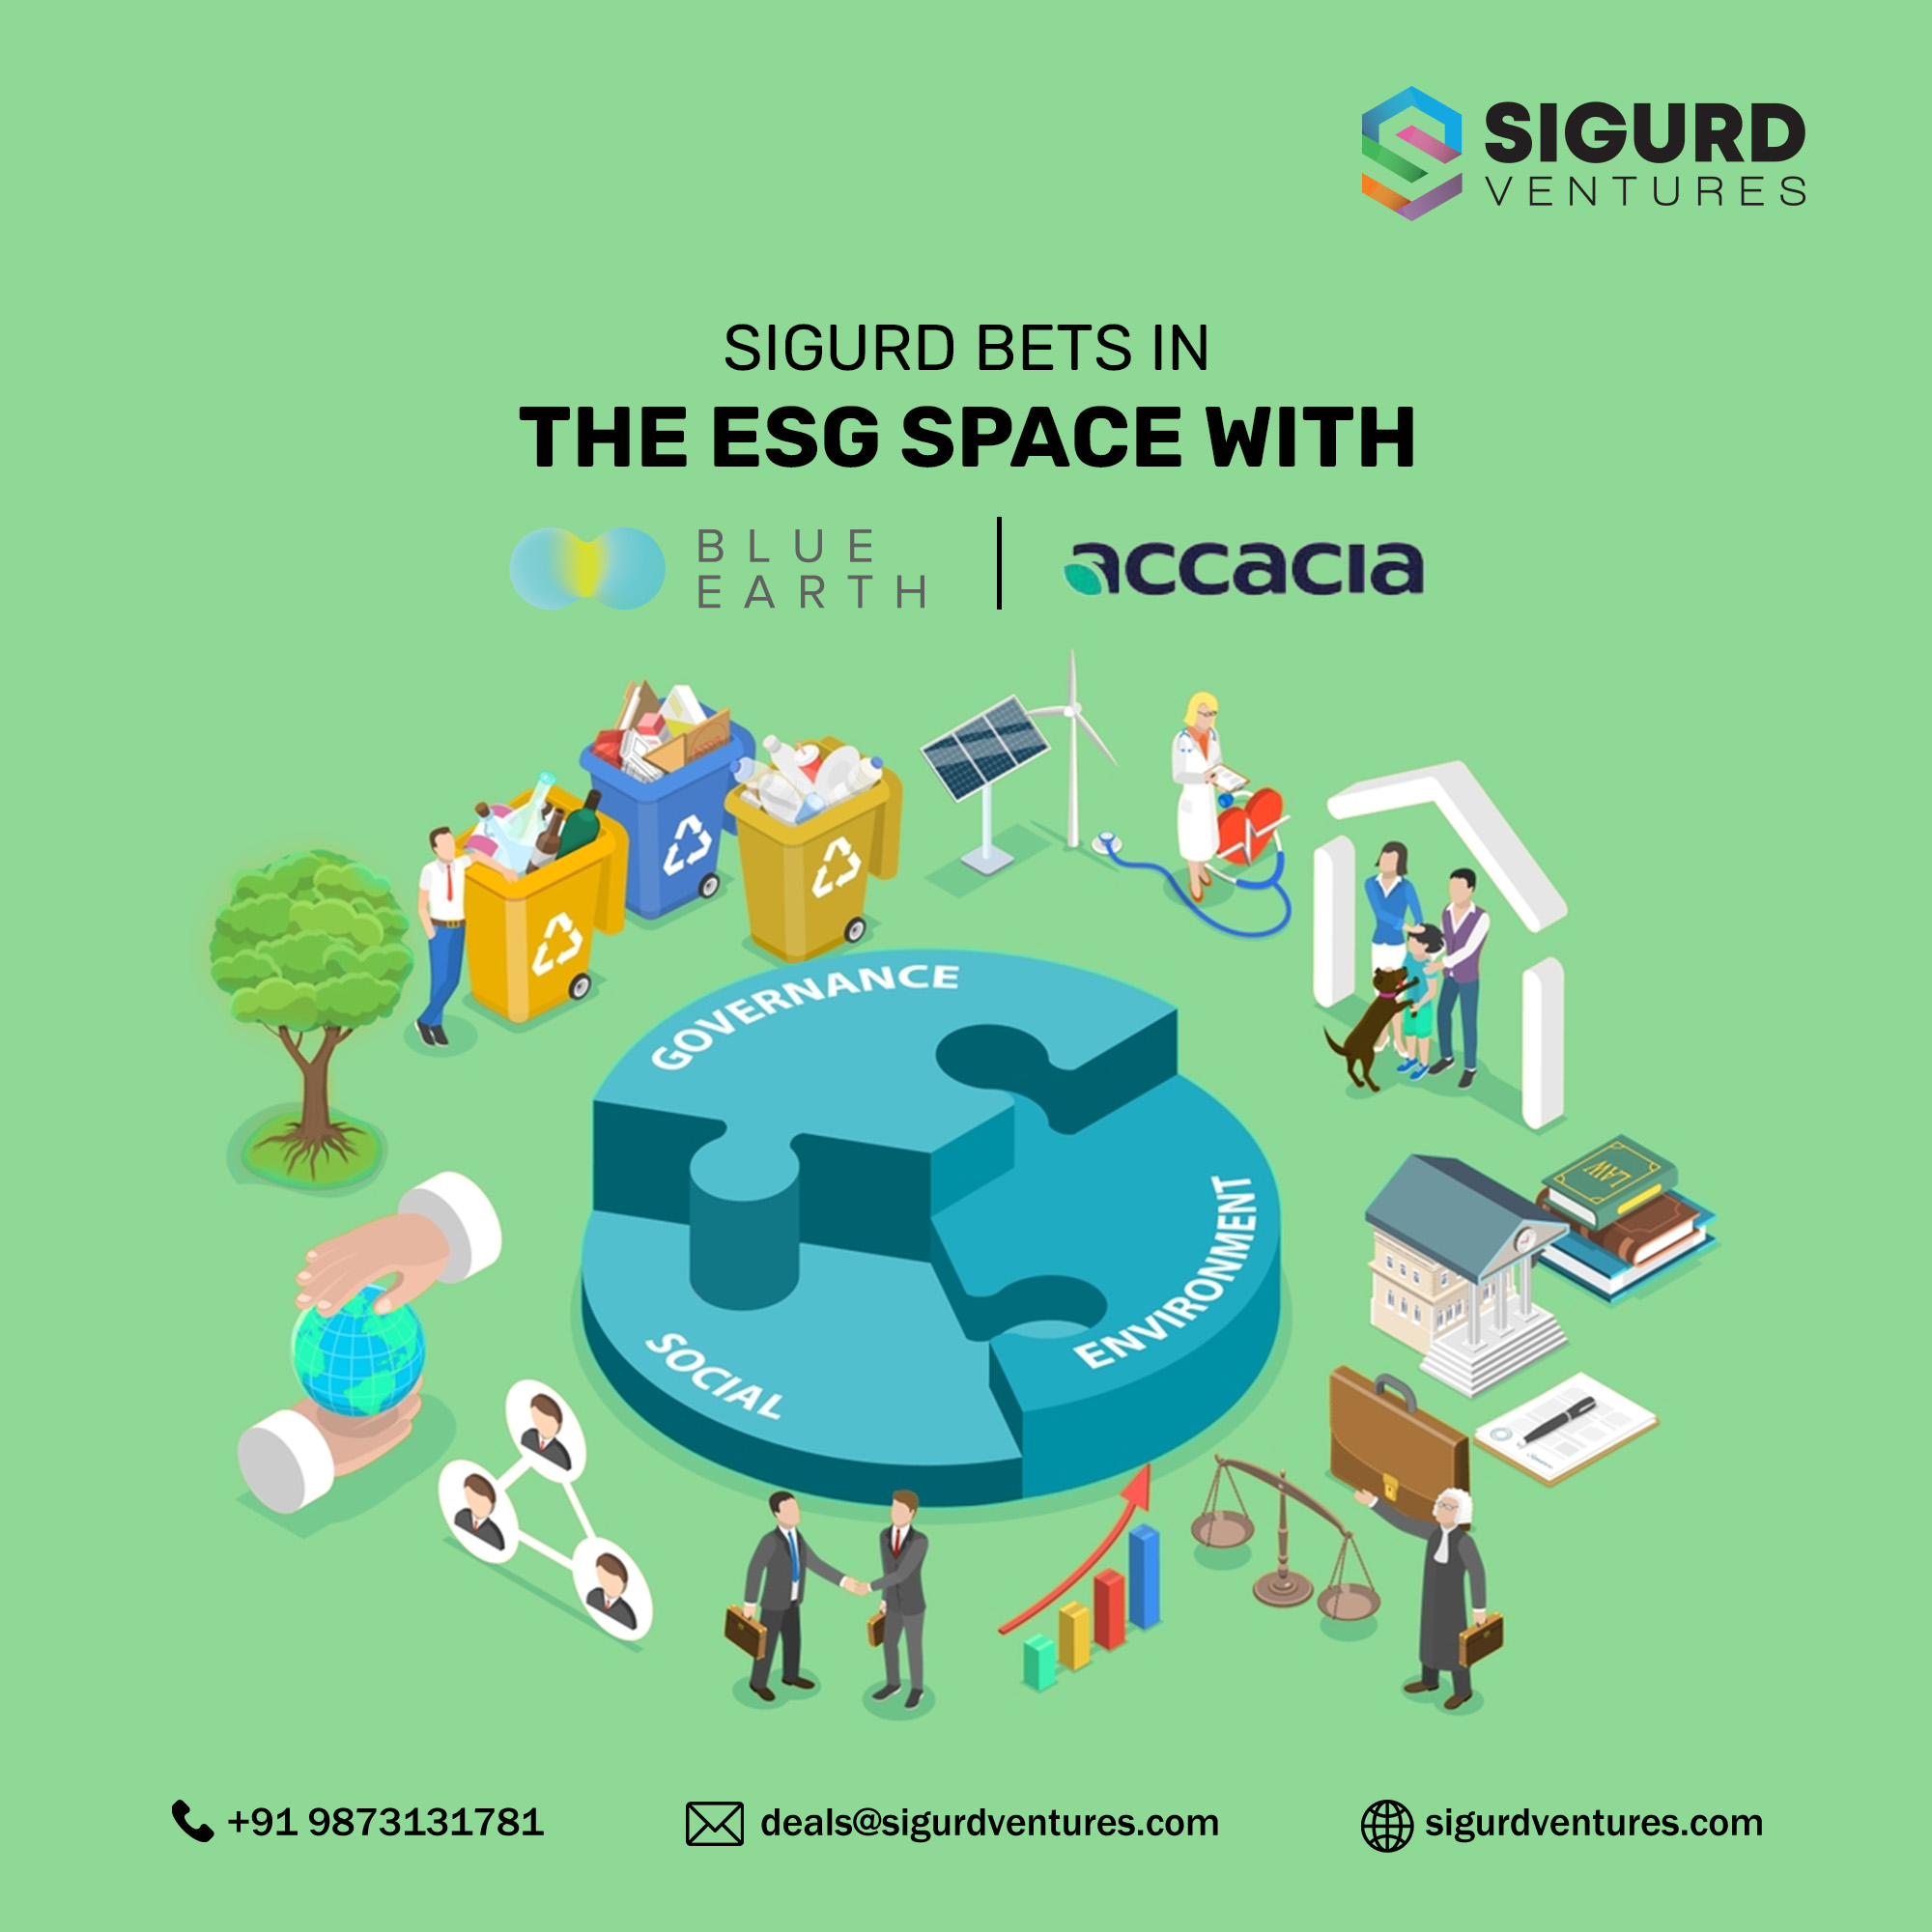 Sigurd bets in the ESG space with Blue Earth and Accacia